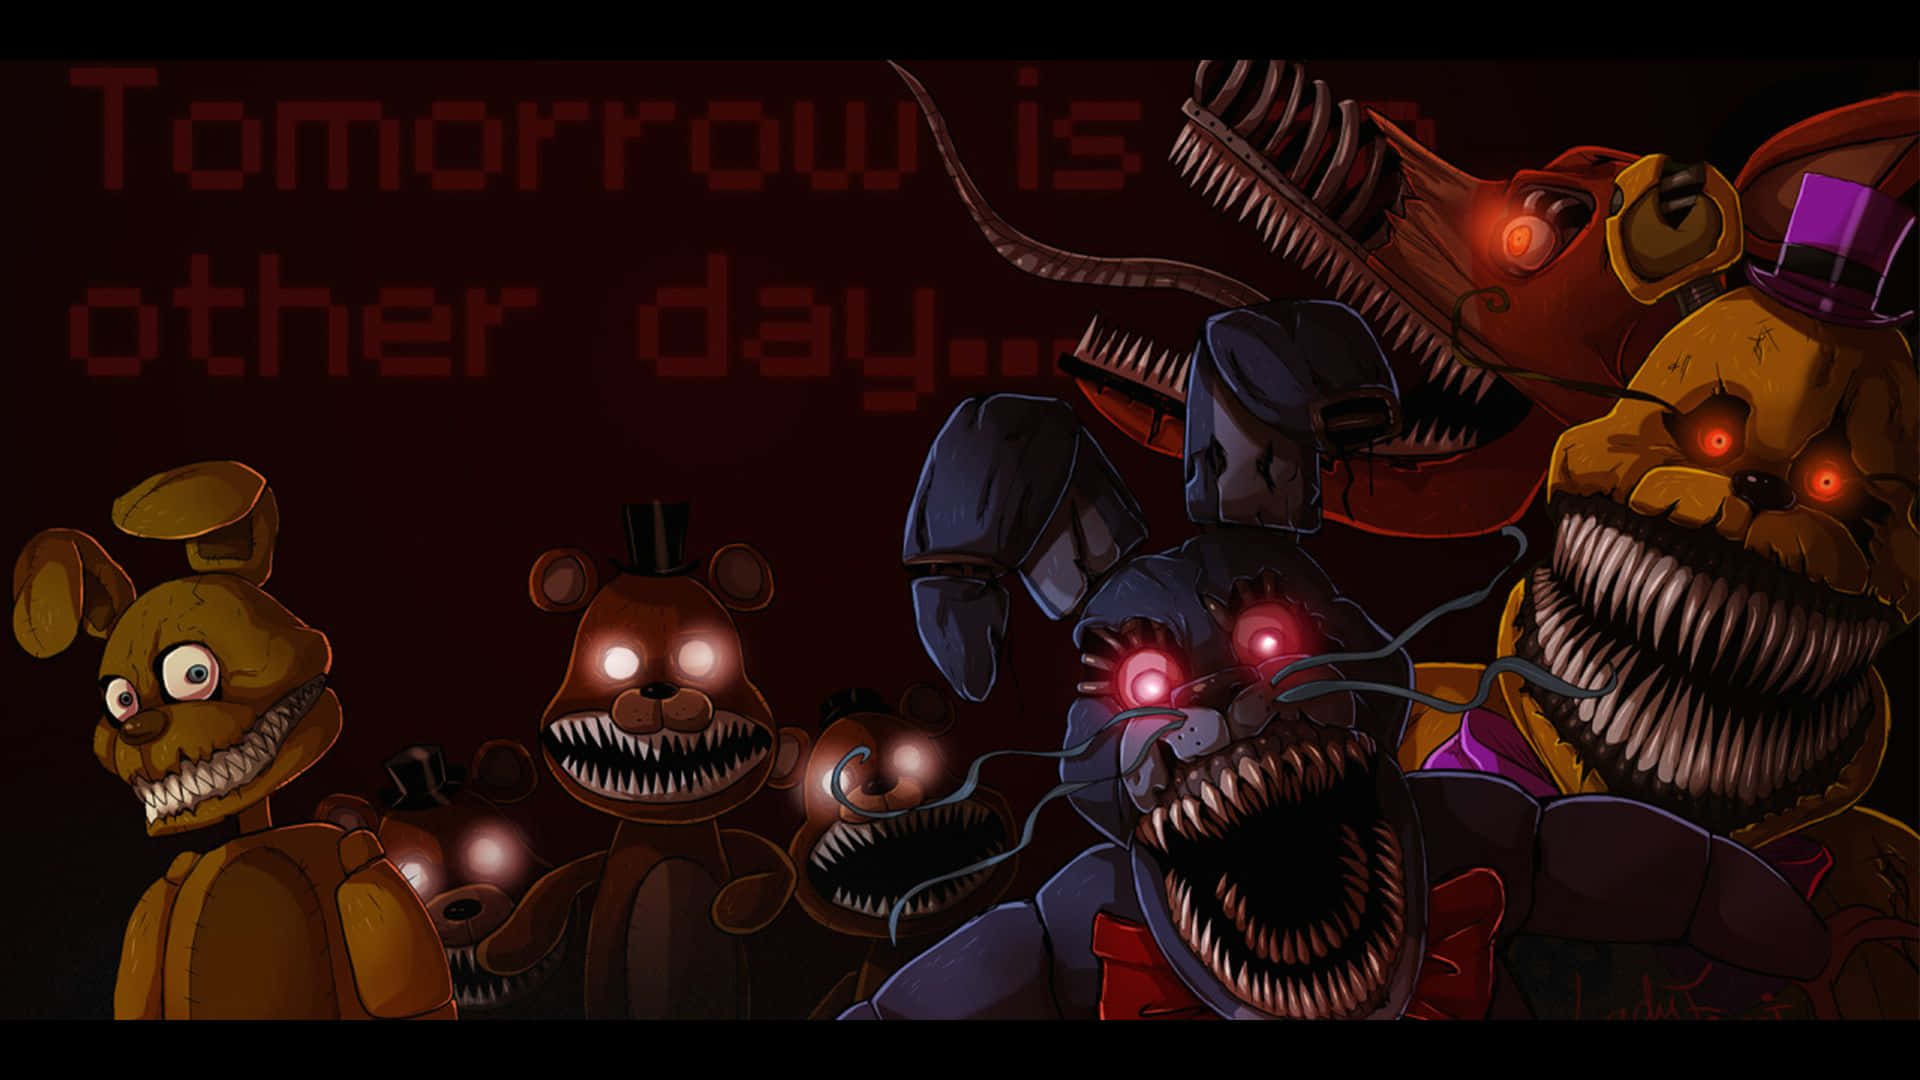 Video Game Five Nights at Freddy's 4 4k Ultra HD Wallpaper